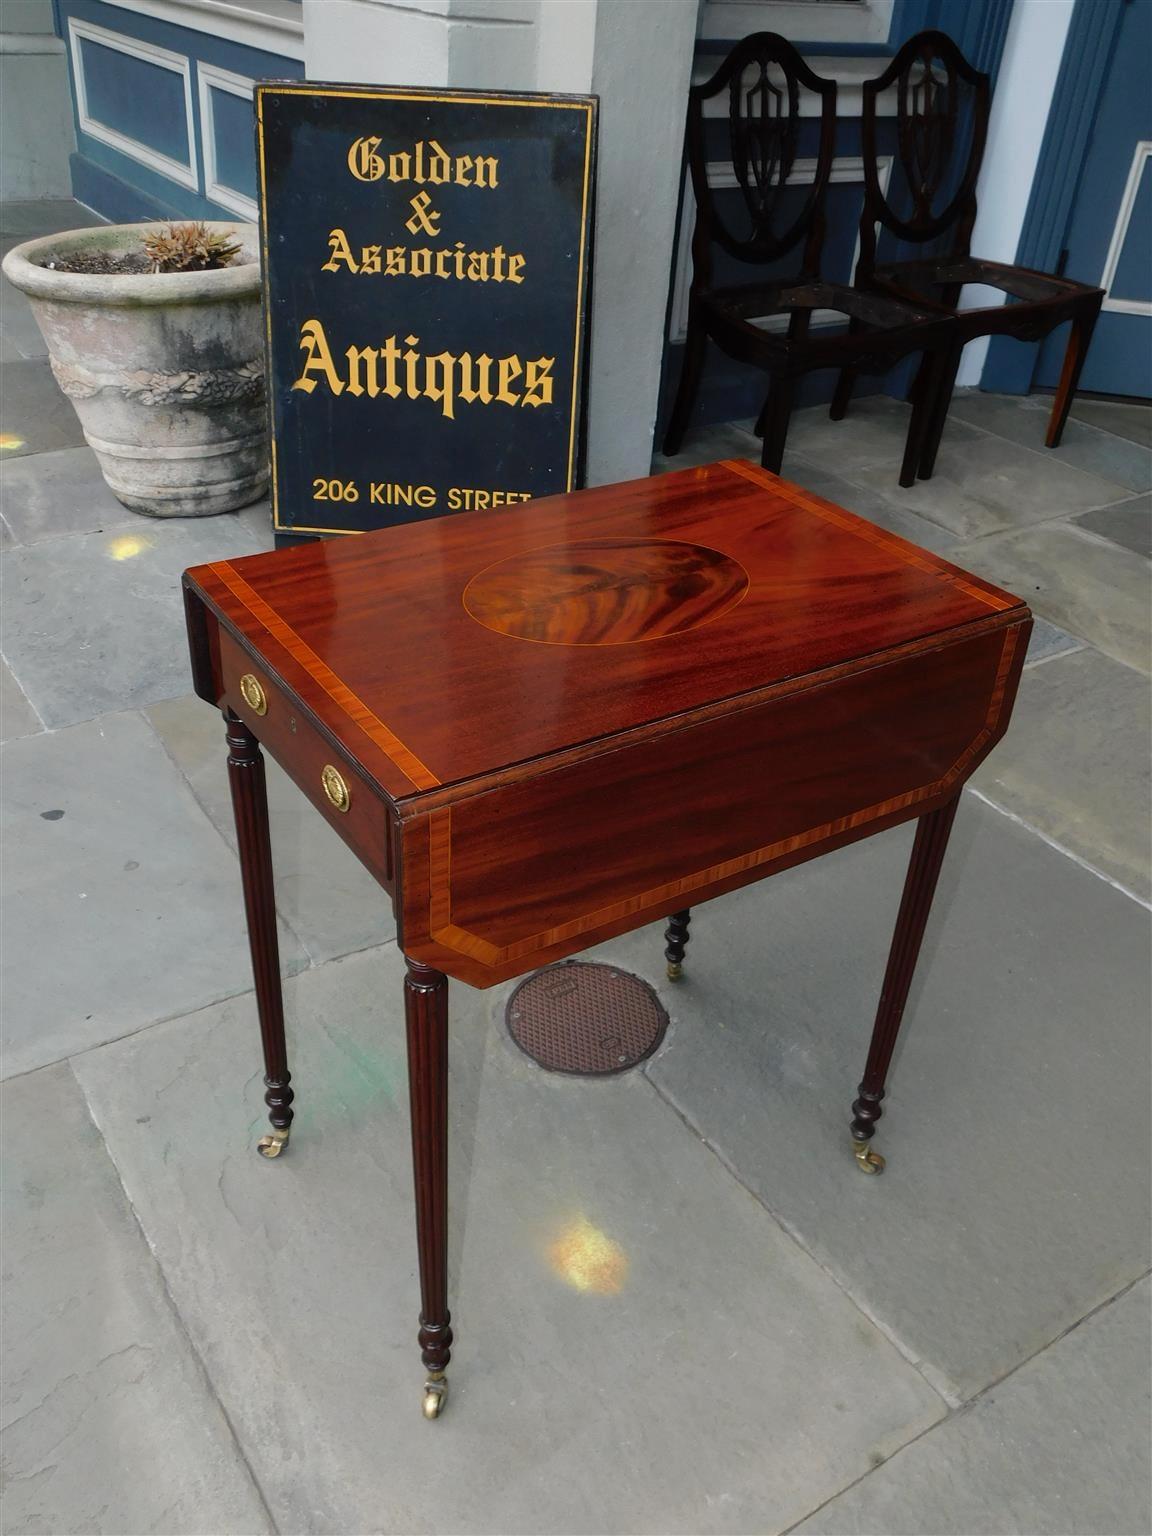 English Regency mahogany drop leaf pembroke table with satinwood string inlay, tulip wood cross banding, original oval brasses, and resting on turned bulbous reeded legs with the original brass casters, Early 19th century.
Table with leaves up is